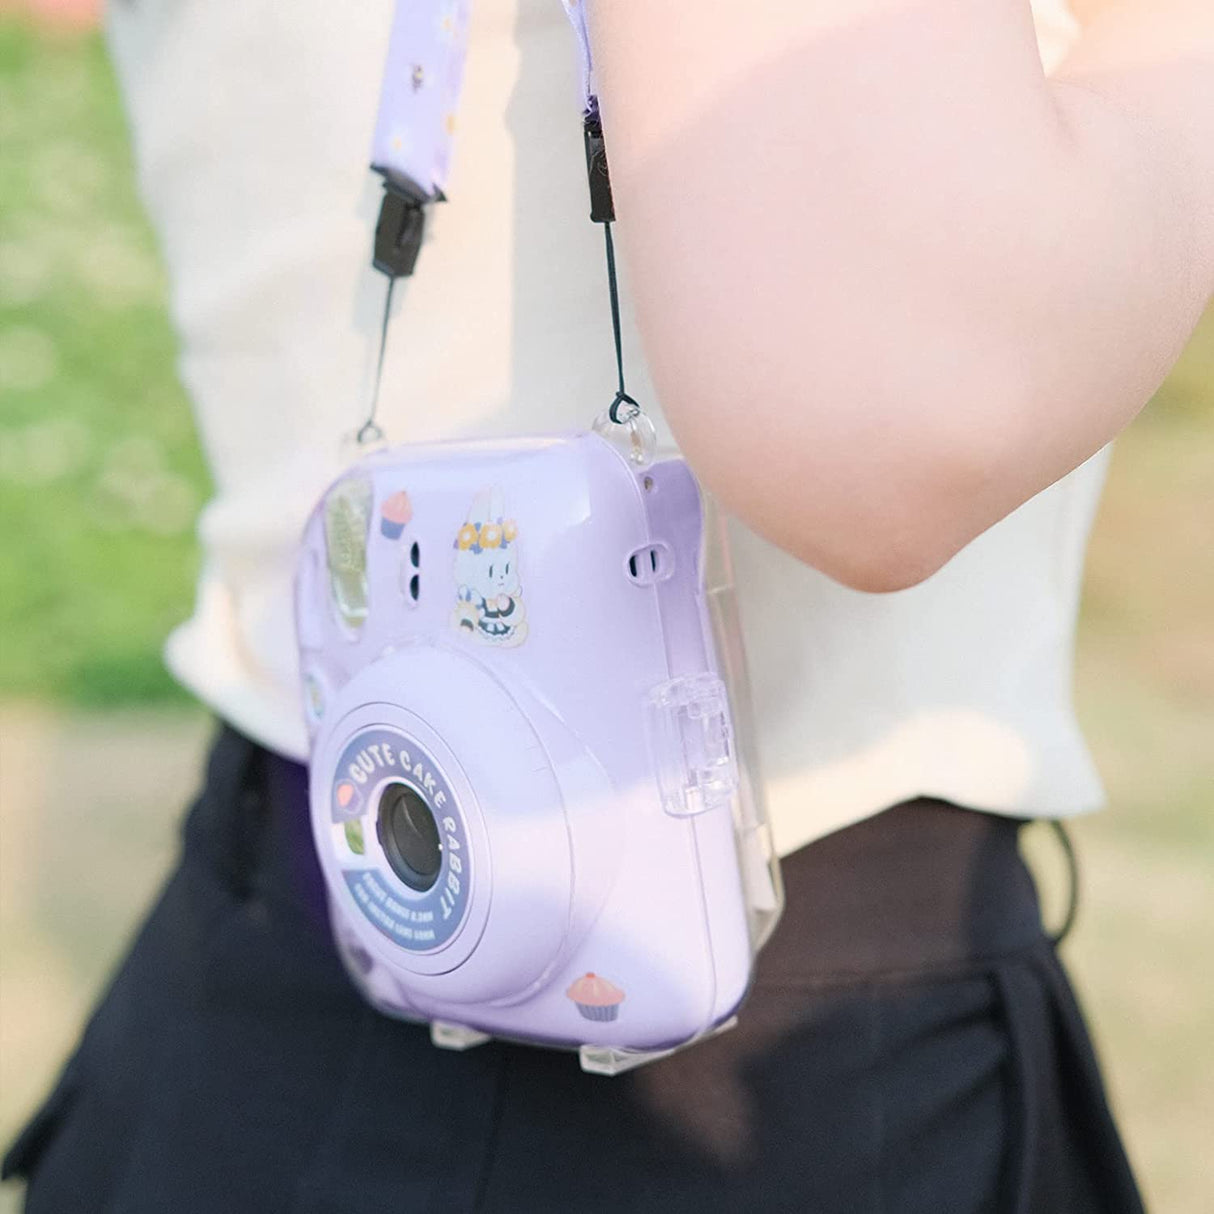 Zikkon Instax Mini 12 Hard Carrying Protective Case with Shoulder Straps and Stickers Decoration Set Lilac Purple